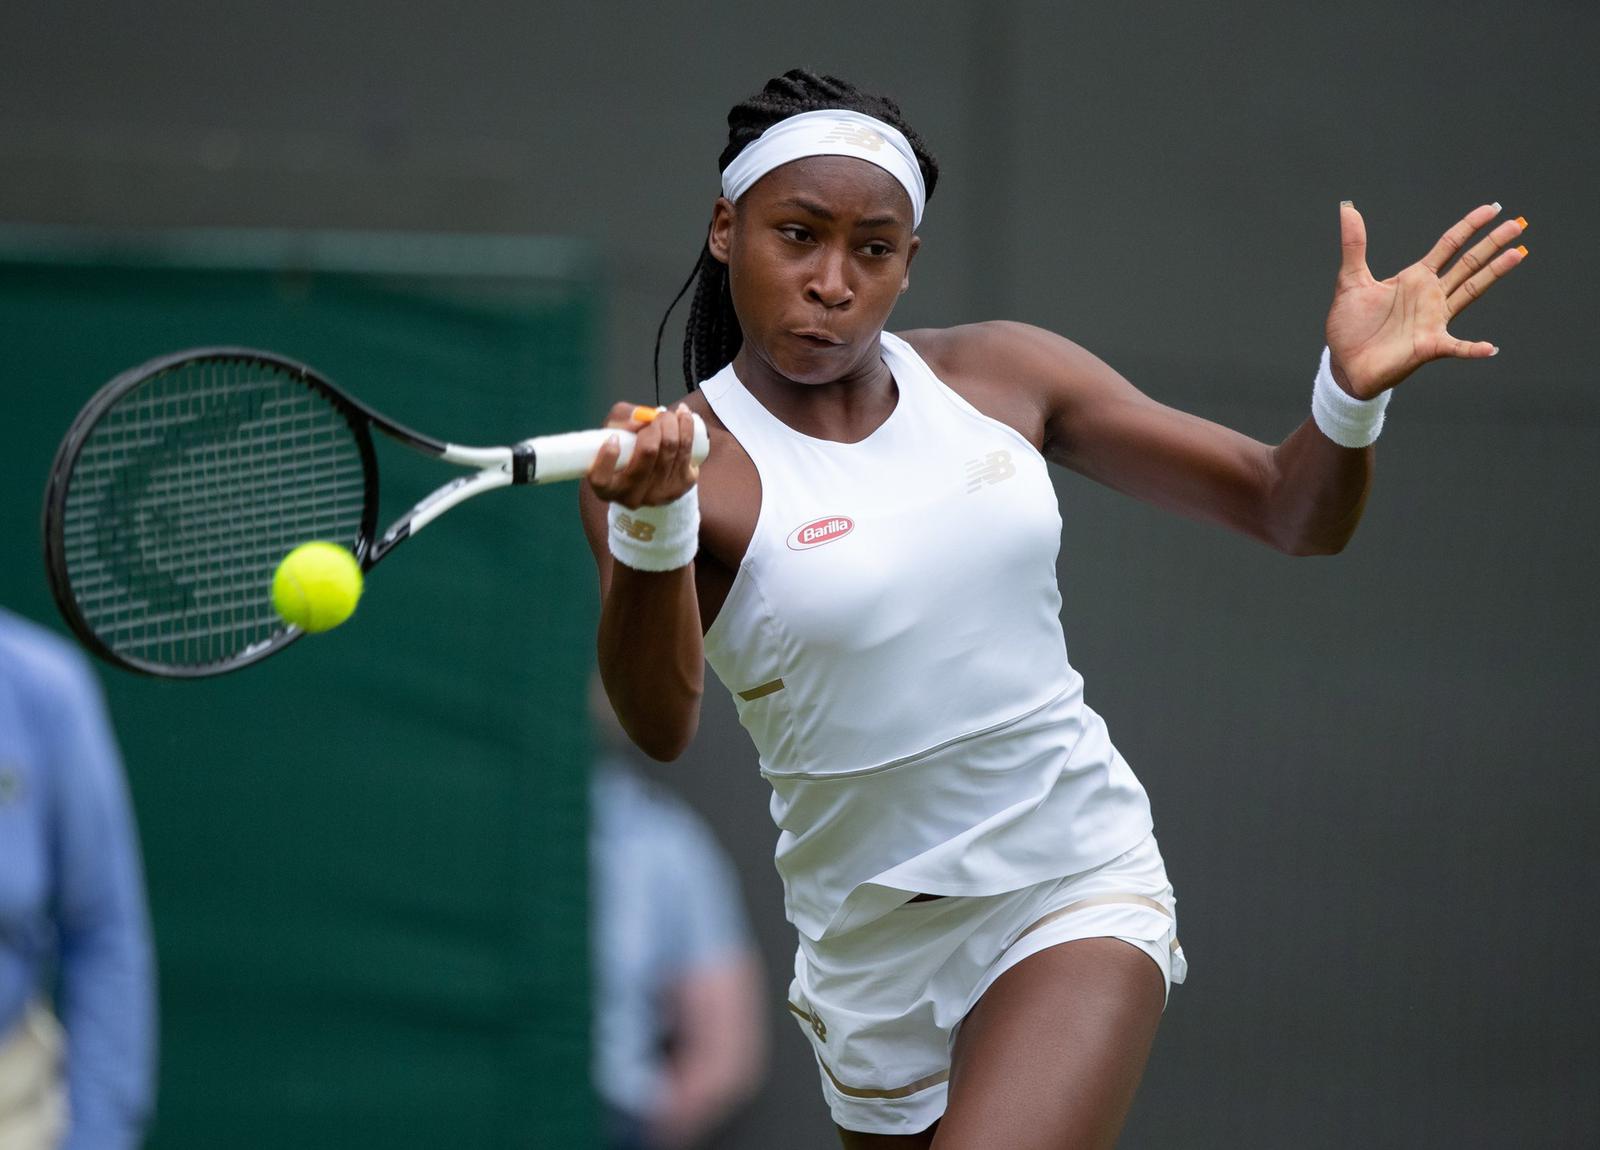 Tennis-Gauff loses match but learns lessons from Osaka